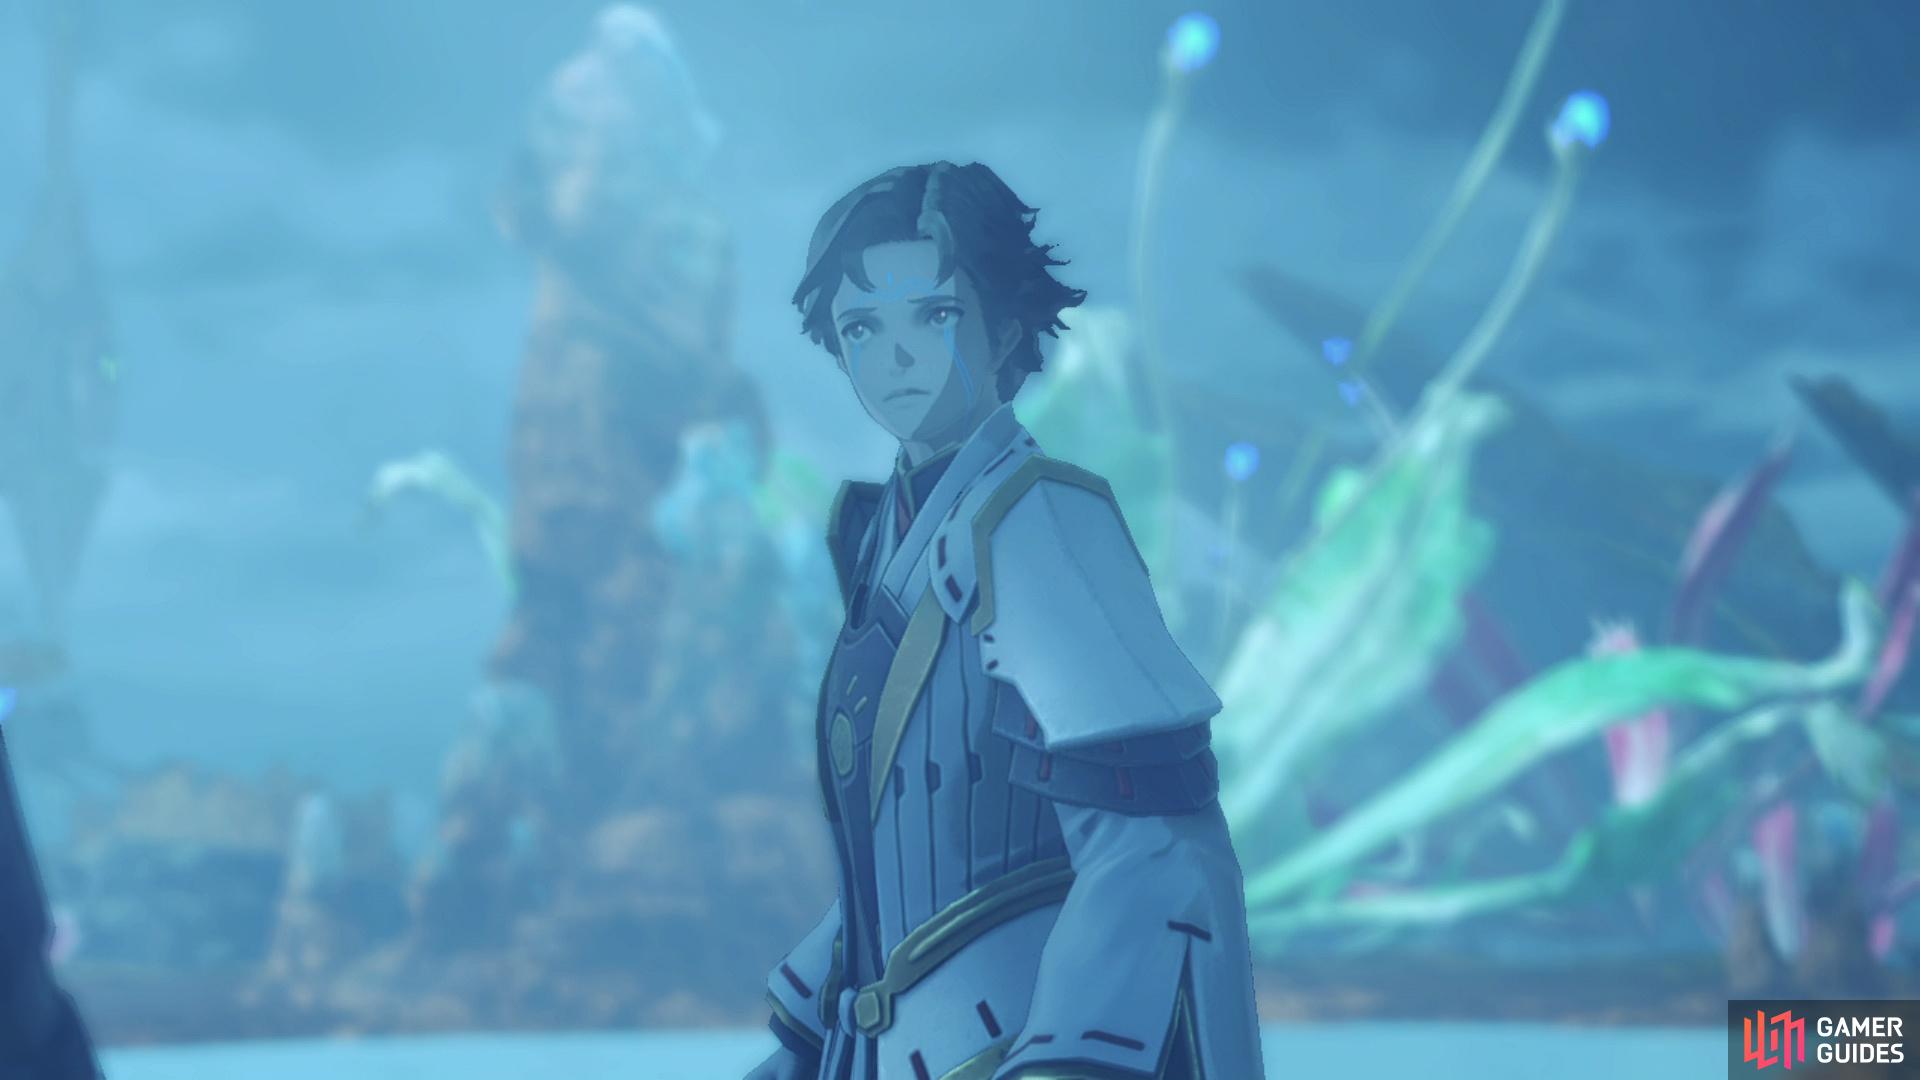 Effervescent Heart is Isurd’s Ascension Quest in Xenoblade Chronicles 3.